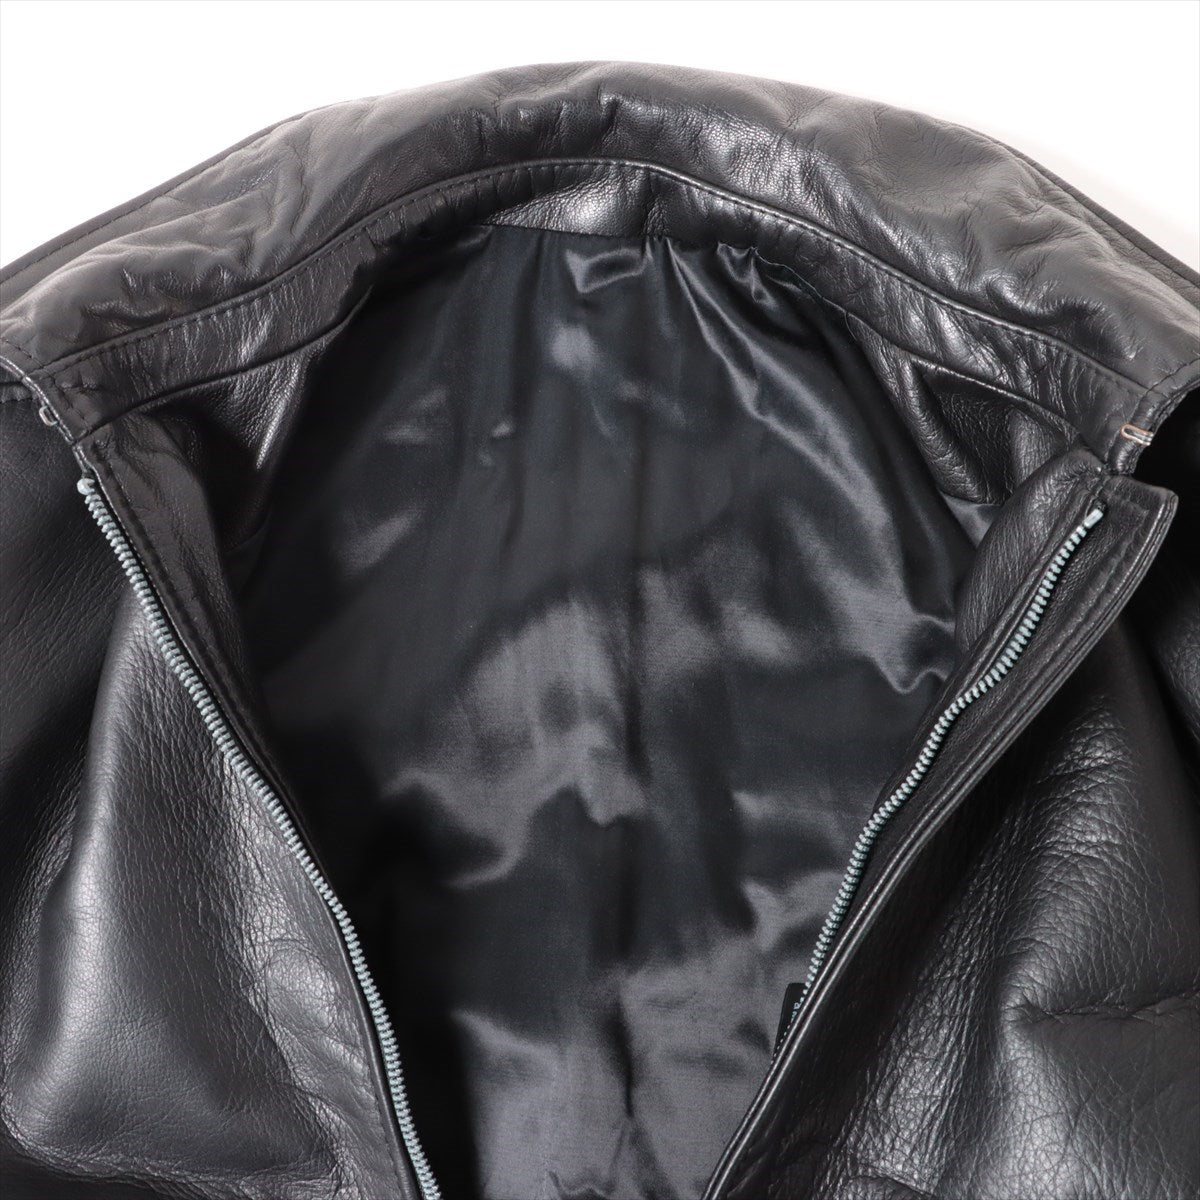 Balenciaga 11 years Leather Leather jacket 48 Men's Black  272808 There are slits on the lining